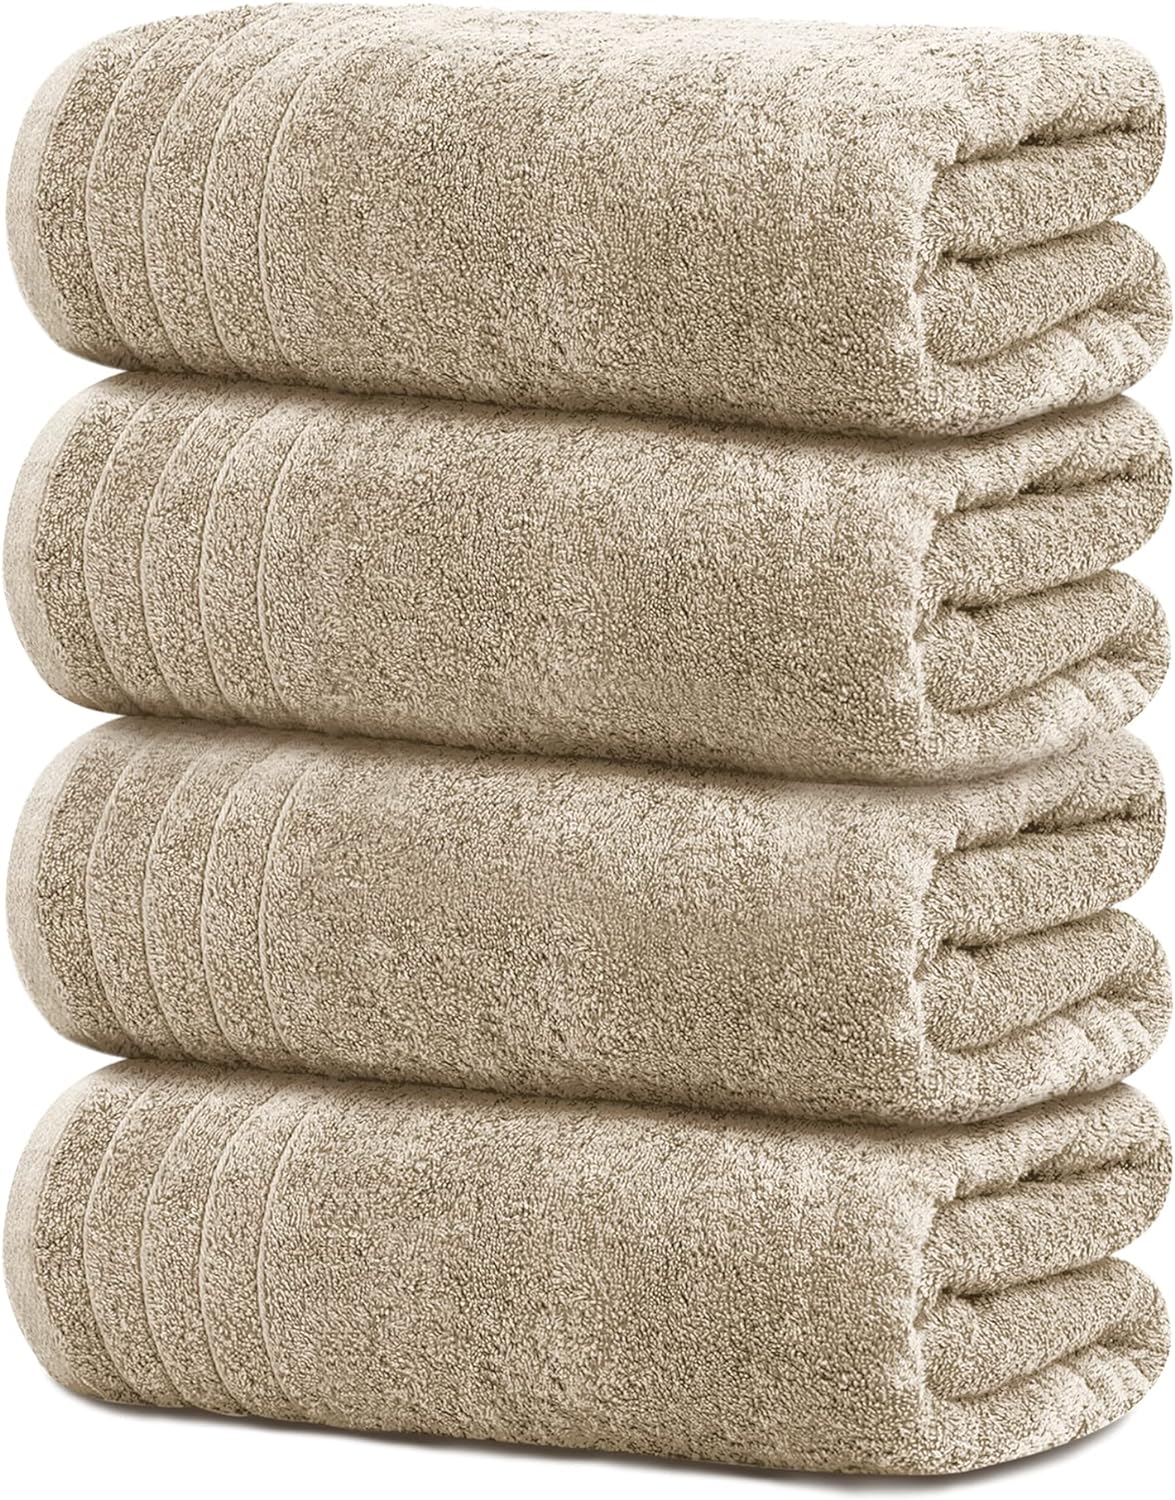 Tens Towels 4 Pack Extra Large Bath Towels, 30 x 60 Inches, 100% Cotton,  Lighter